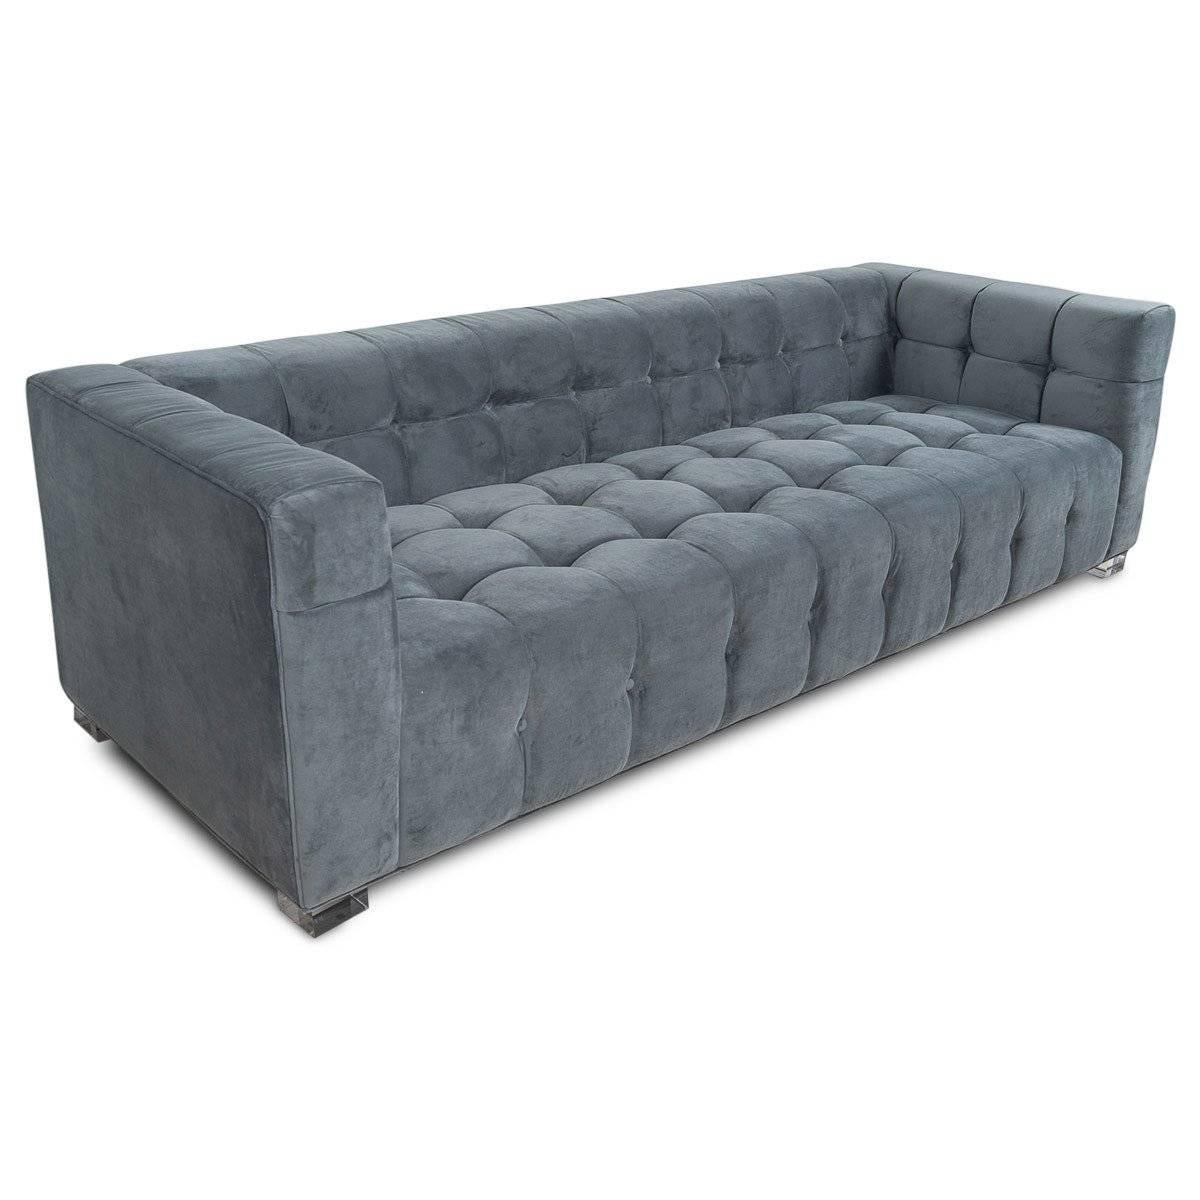 Introducing Modshop's newest addition, our Delano charcoal velvet sofa. This handcrafted, customizable sofa features block Lucite legs and delicately folded biscuit tufting with pulled buttons in a soft velvet. 

Measures: Overall length: 84